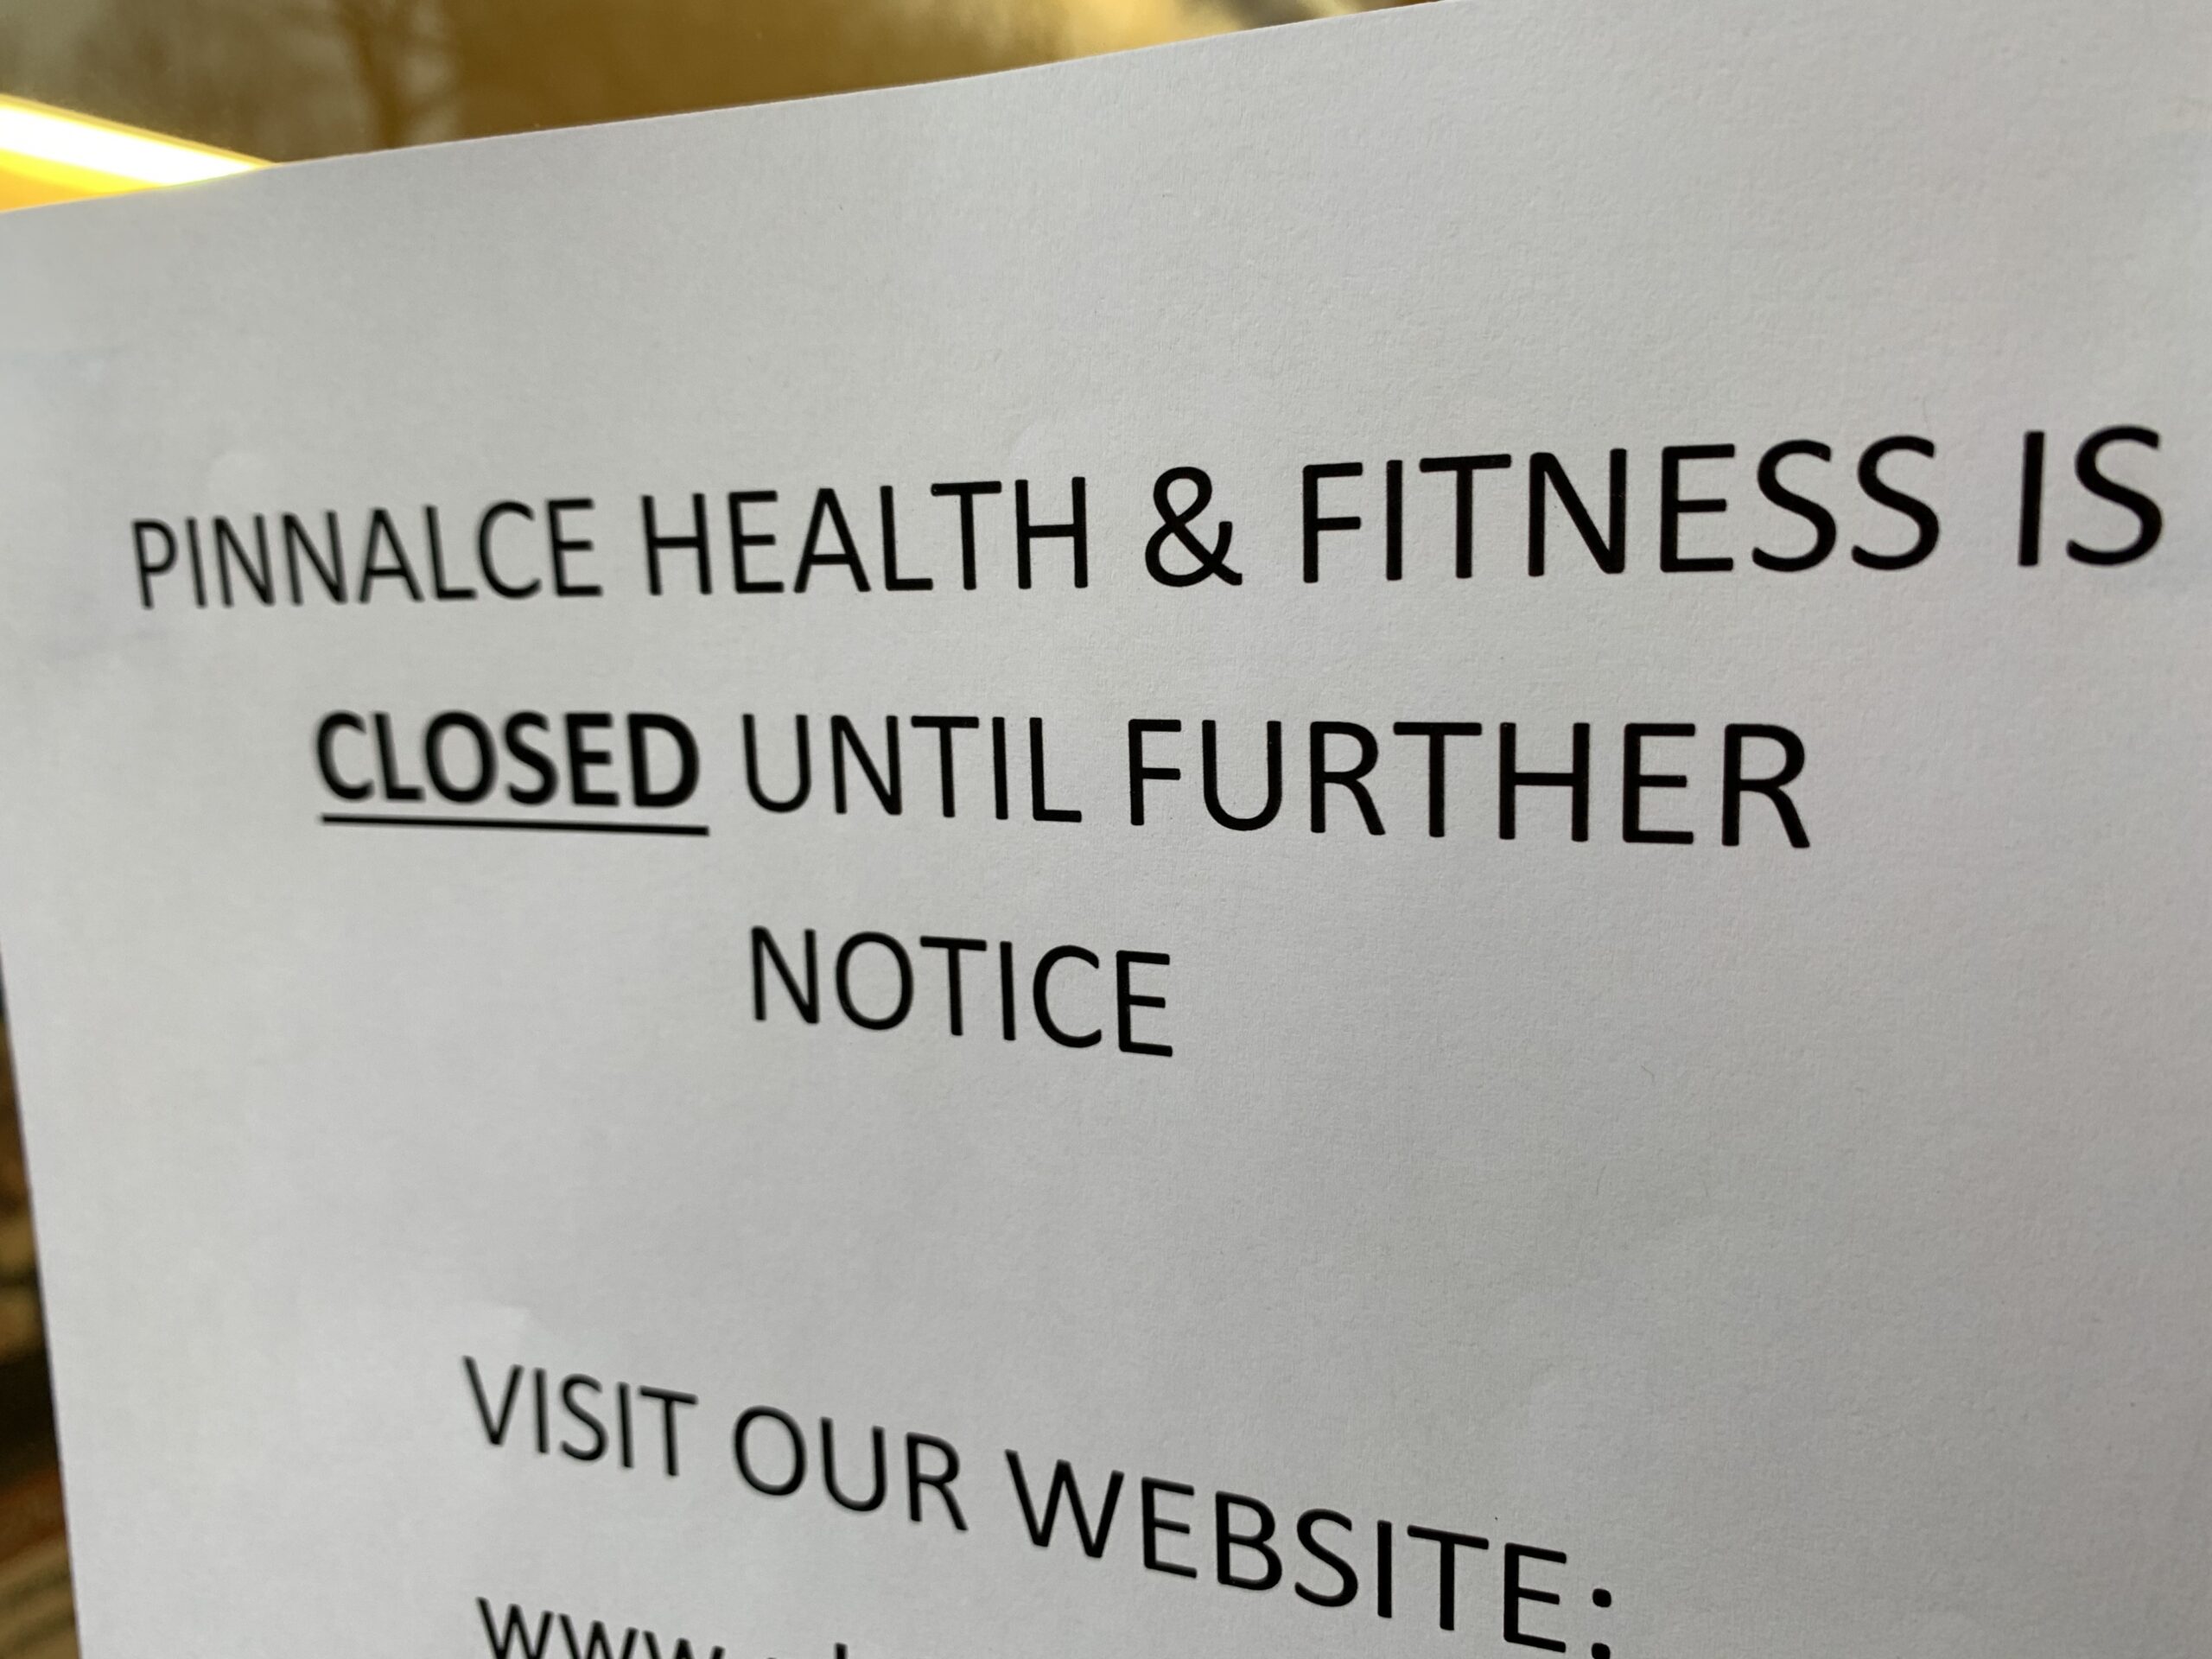 Pinnacle Health and Fitness in Madison says it will be closed until further notice